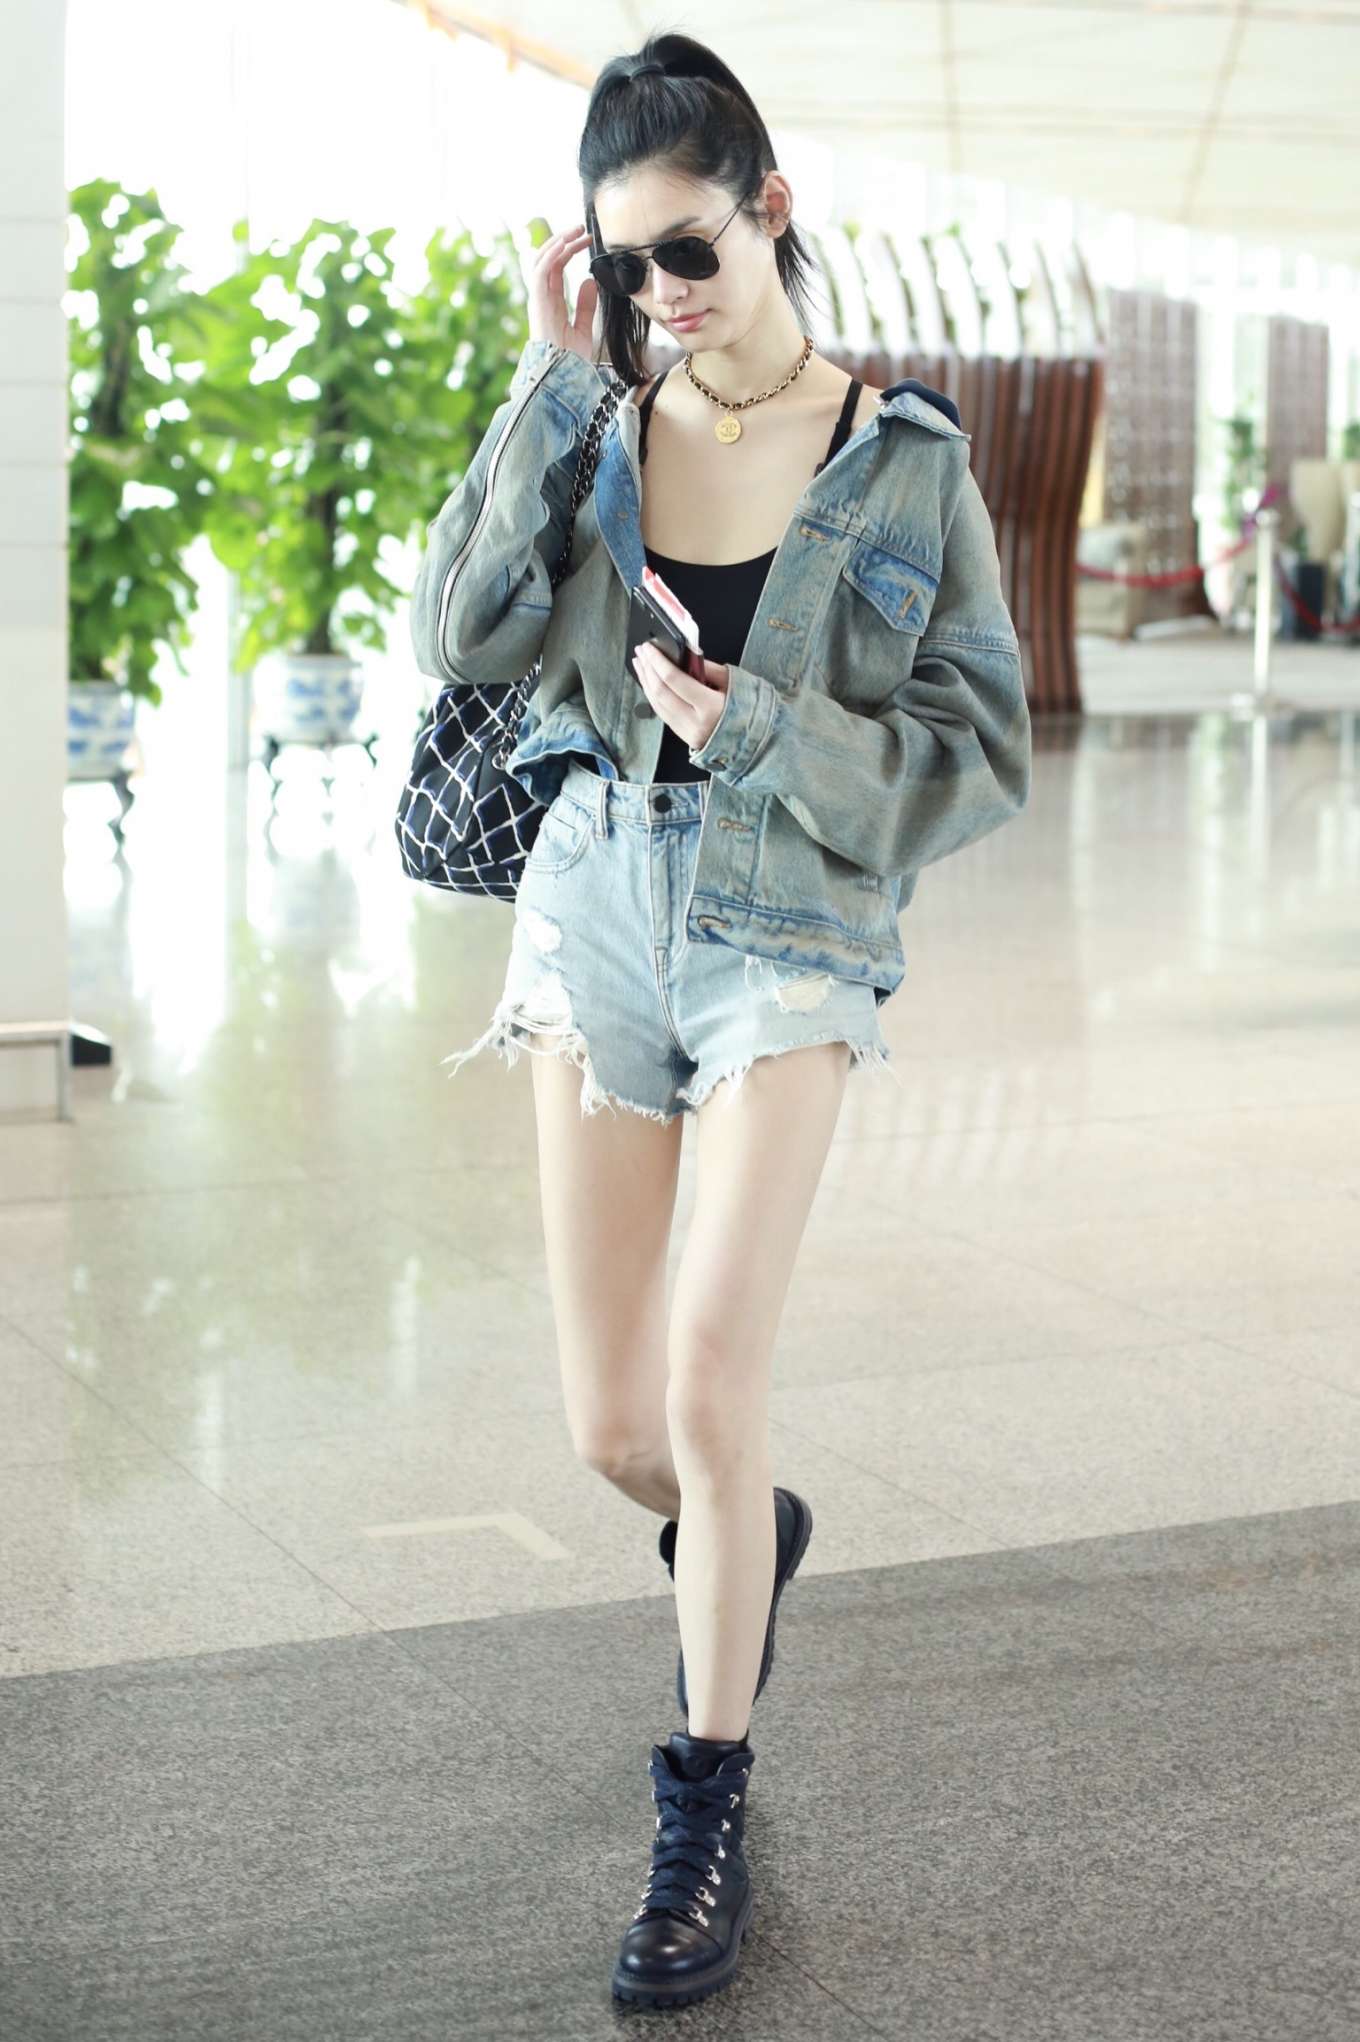 Ming Xi in Jeans at Beijing International Airport